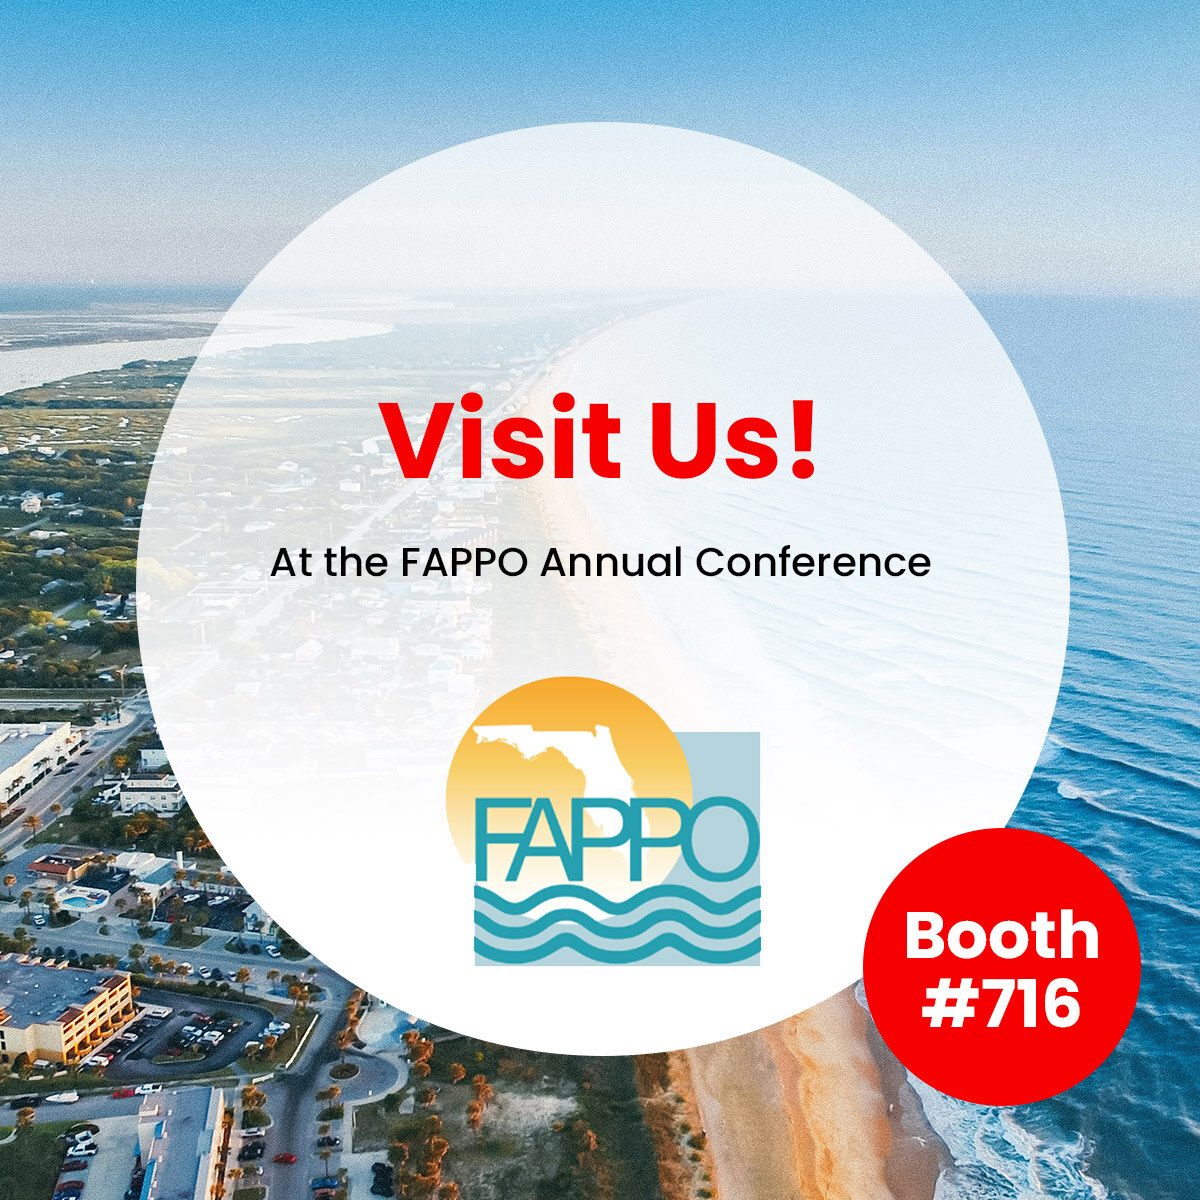 We're excited to be attending the FAPPO Annual Conference from May 19th - May 20th in Lake Buena Vista, FL! Swing by booth #716 for a chat with our team and discover how you can modernize your procurement processes!  

bit.ly/3JVJVIc

#FAPPO #Florida #procurementhero